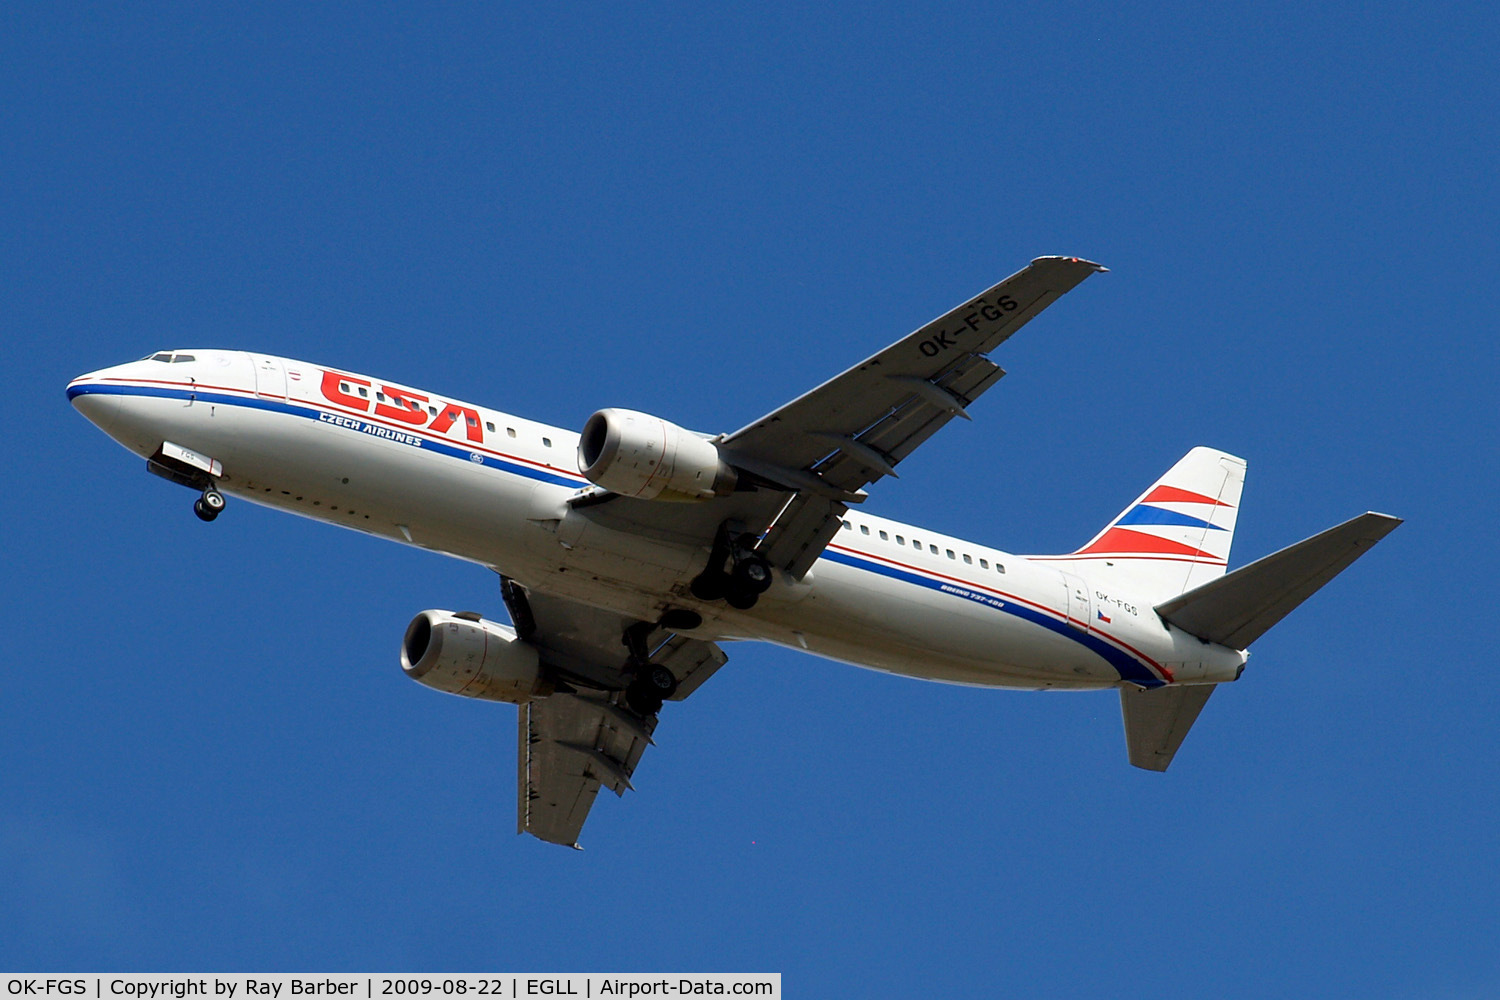 OK-FGS, 2000 Boeing 737-45S C/N 28478, Boeing 737-45S [28478] (CSA Czech Airlines) Home~G 22/08/2009. On approach 27R.